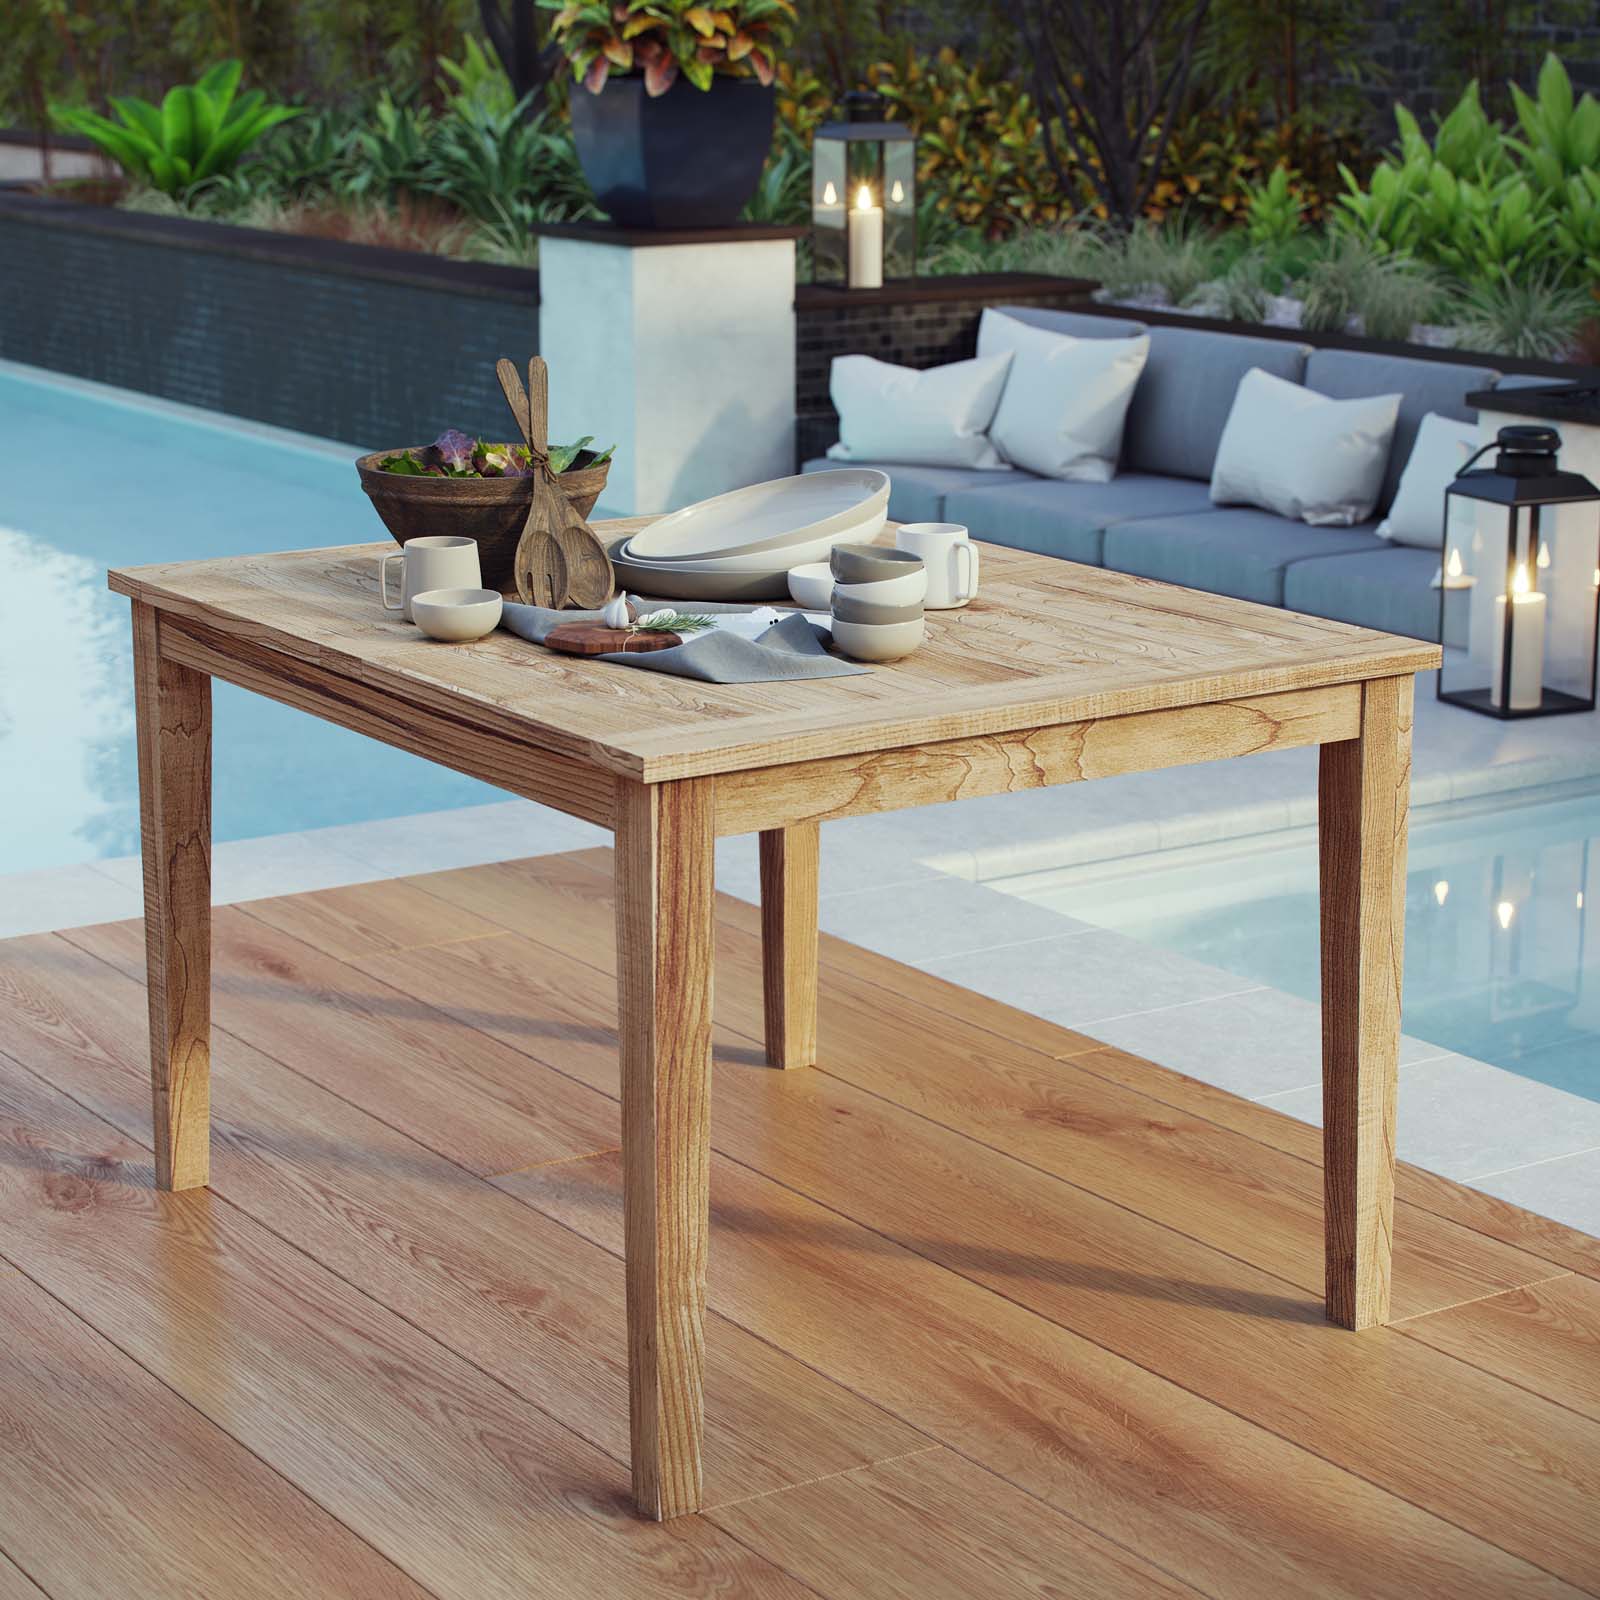 Add Style And Functionality To Your Patio With Teak Patio Side Tables